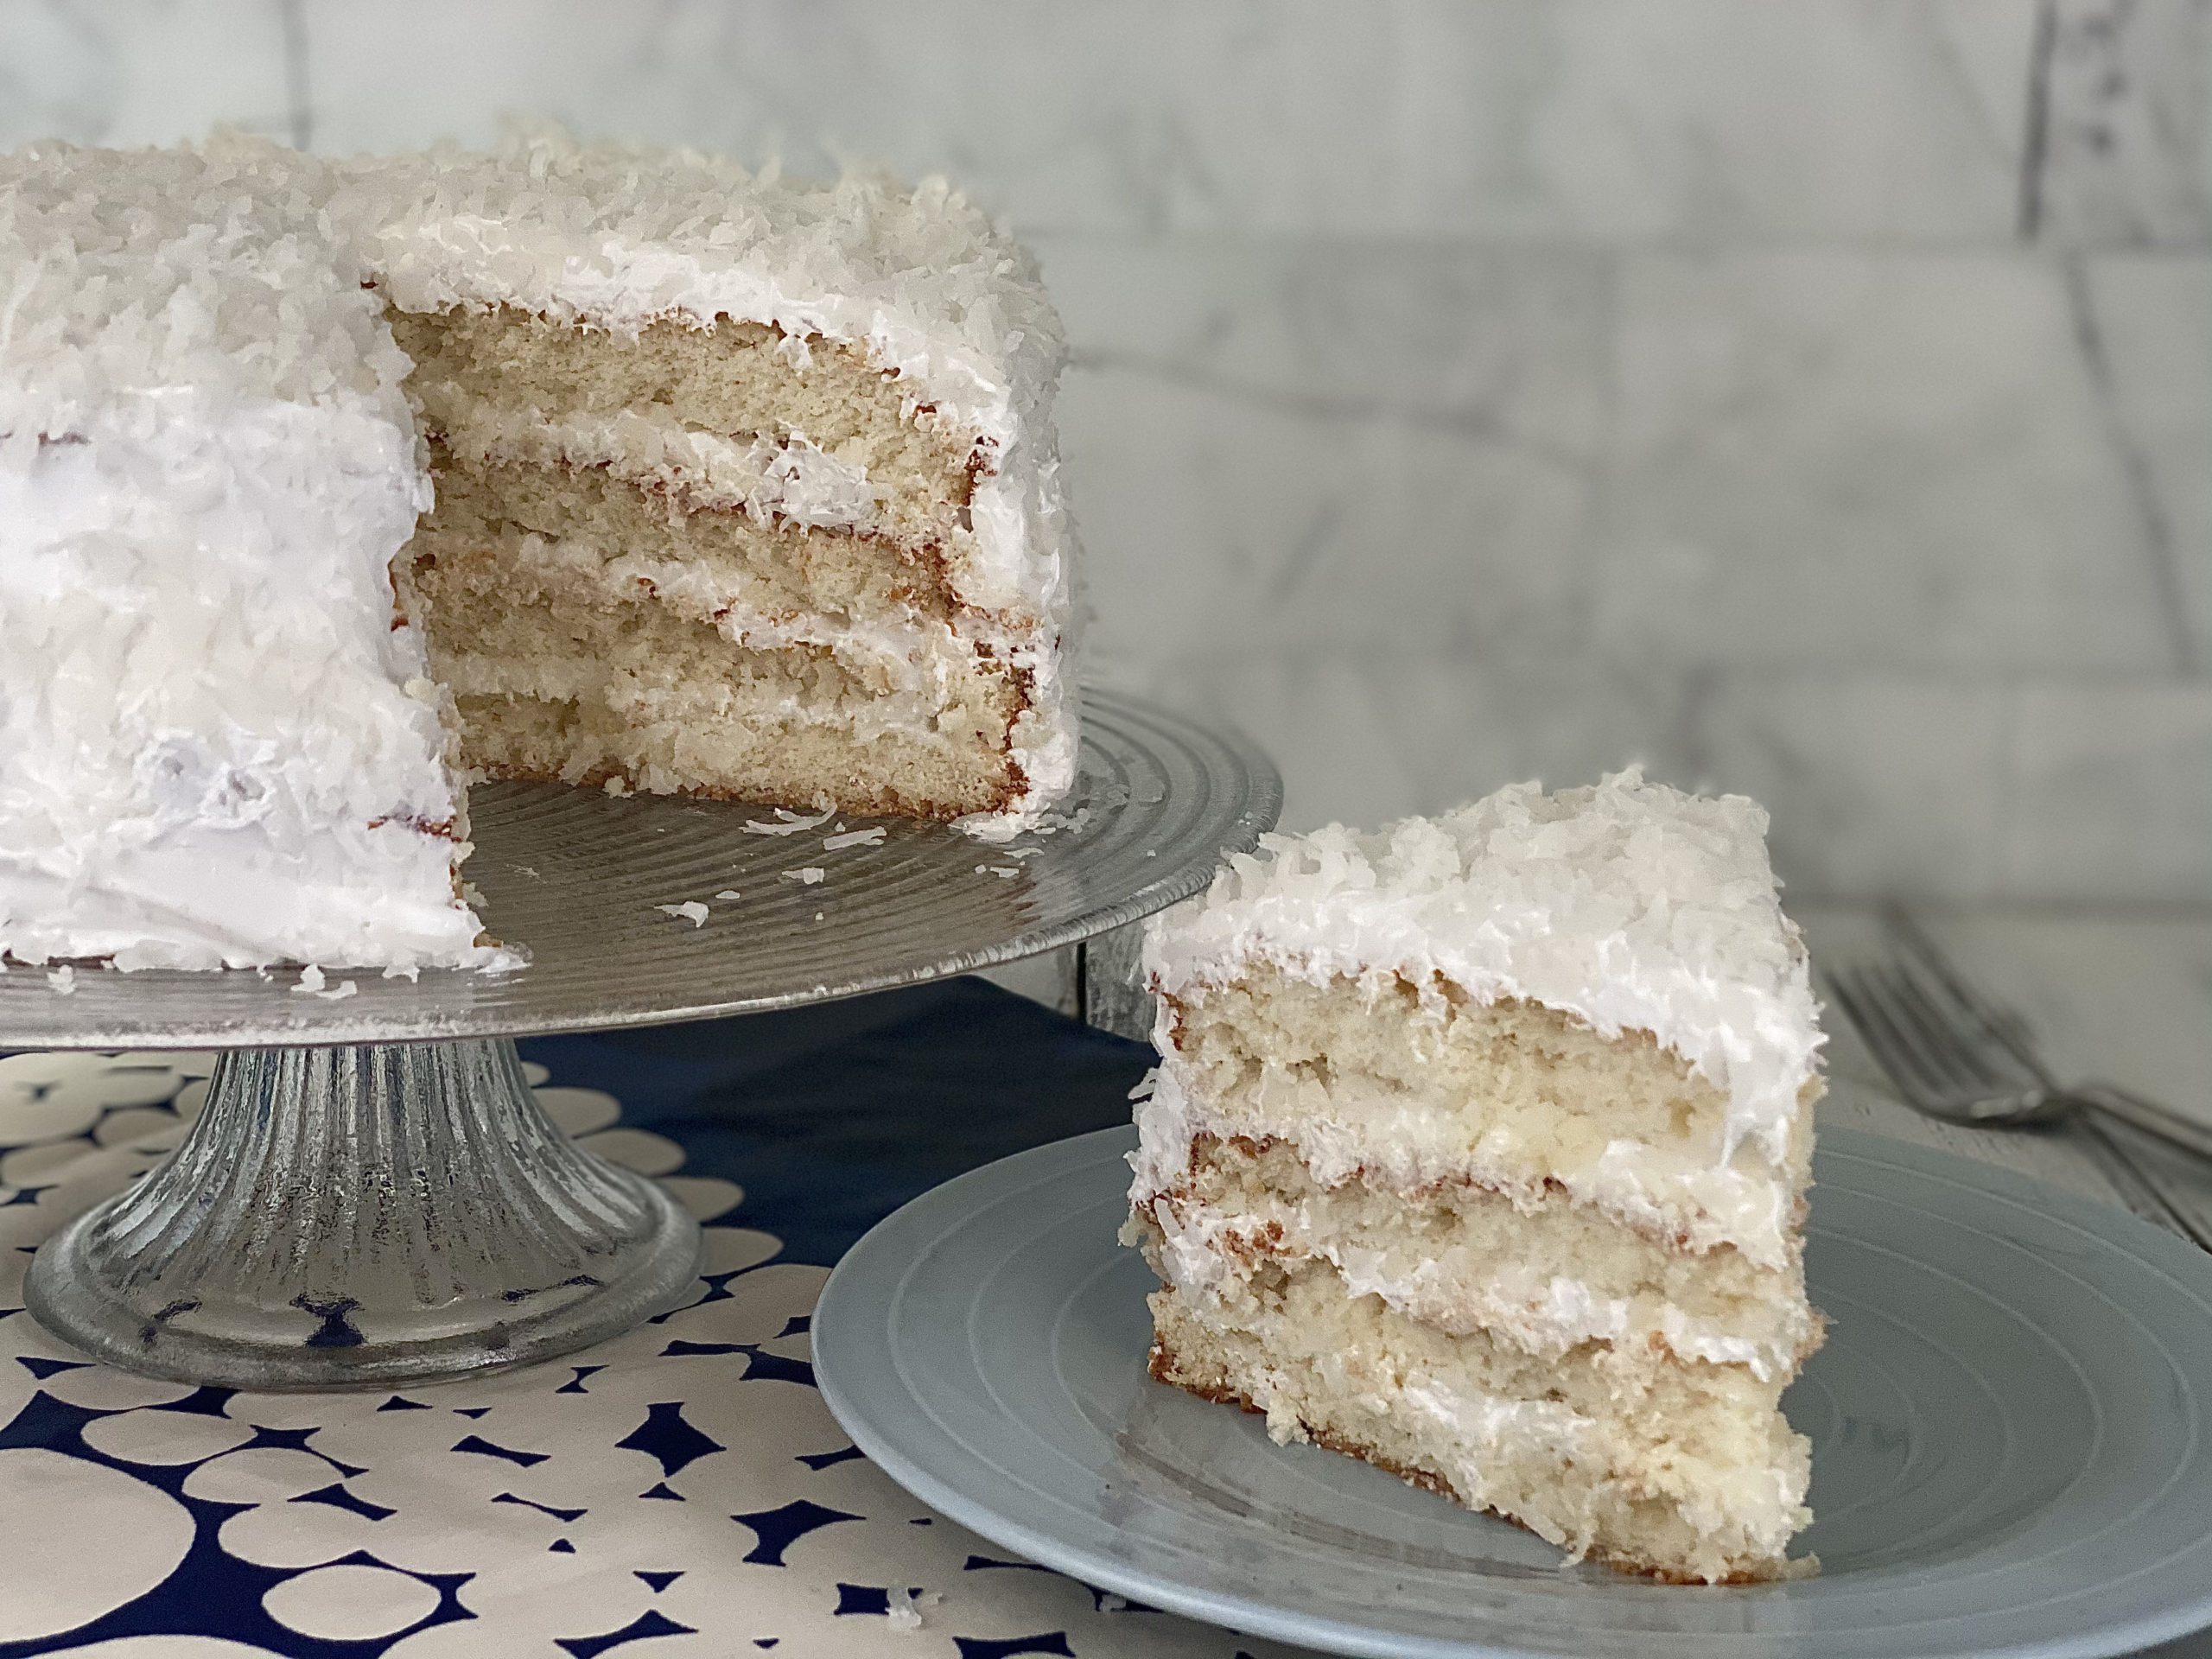 Close-up photograph of a slice of coconut cake with 7-minute frosting. The cake appears moist and fluffy with visible shreds of coconut throughout. The frosting covers the top and sides of the cake, appearing light and fluffy, with toasted coconut flakes sprinkled generously on top